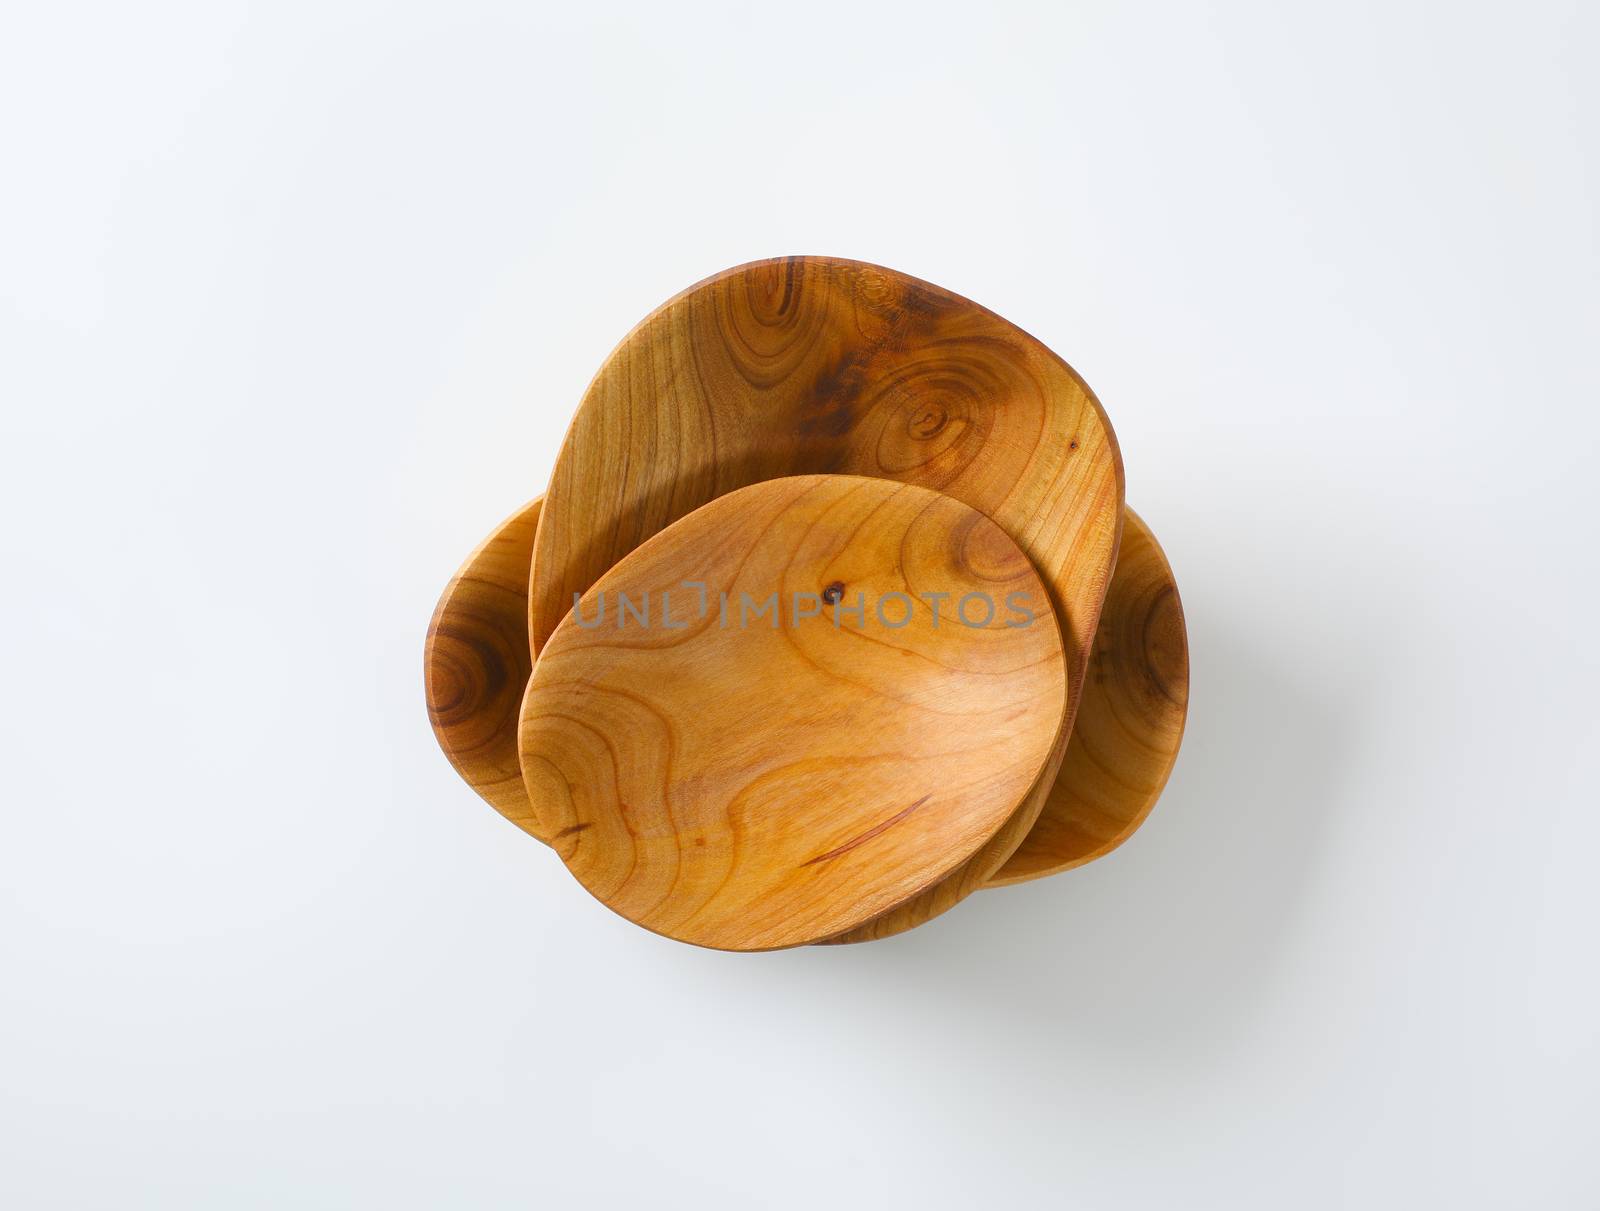 Empty handcrafted natural wood bowls